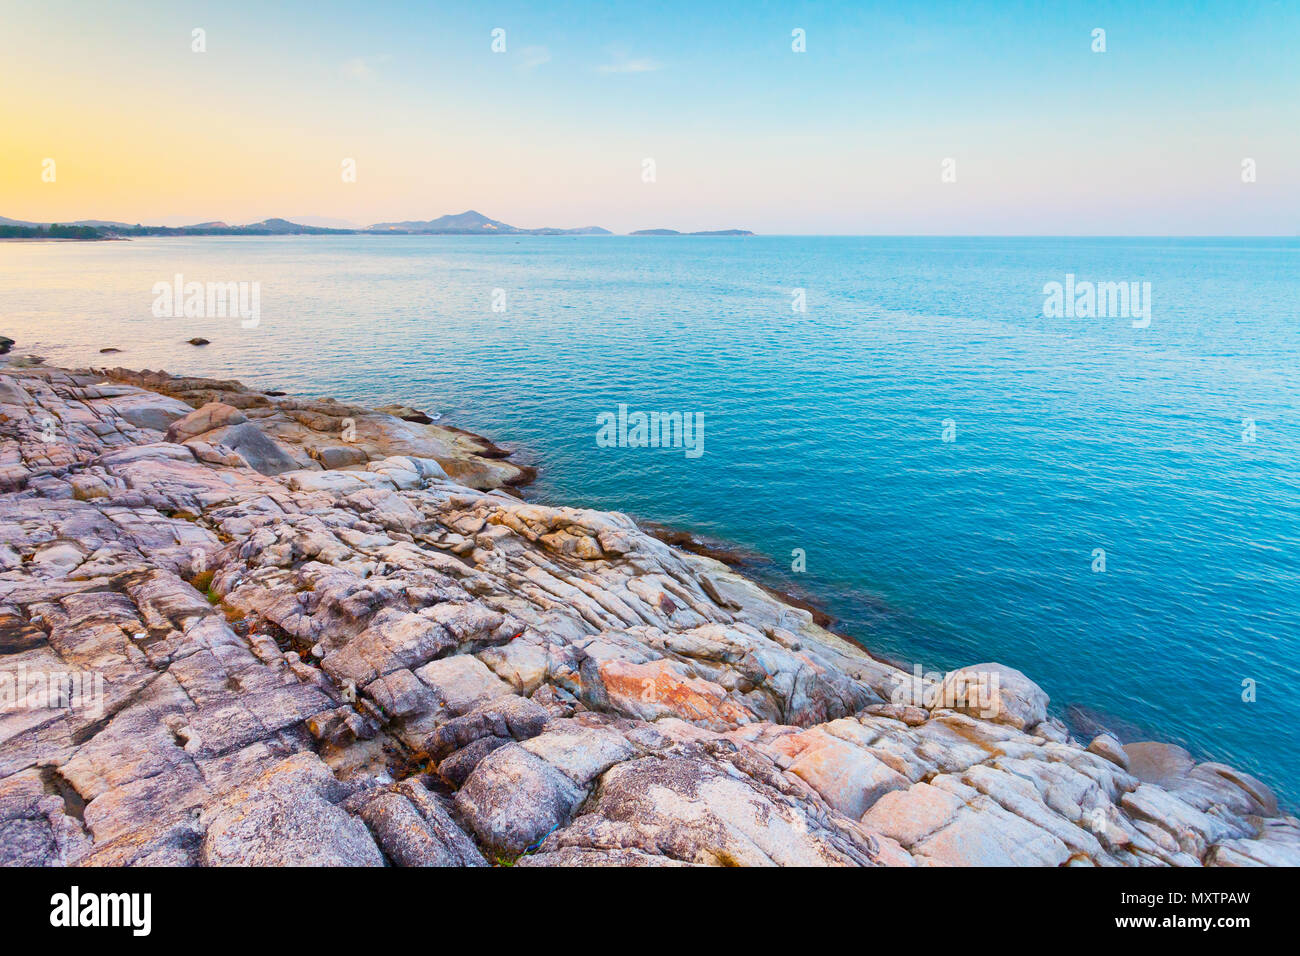 The pile of the boulders next to the calm blue ocean. The kingdom of Thailand. Ideal background in beige, blue shades for the different kinds of the marine illustrations and collages. Stock Photo